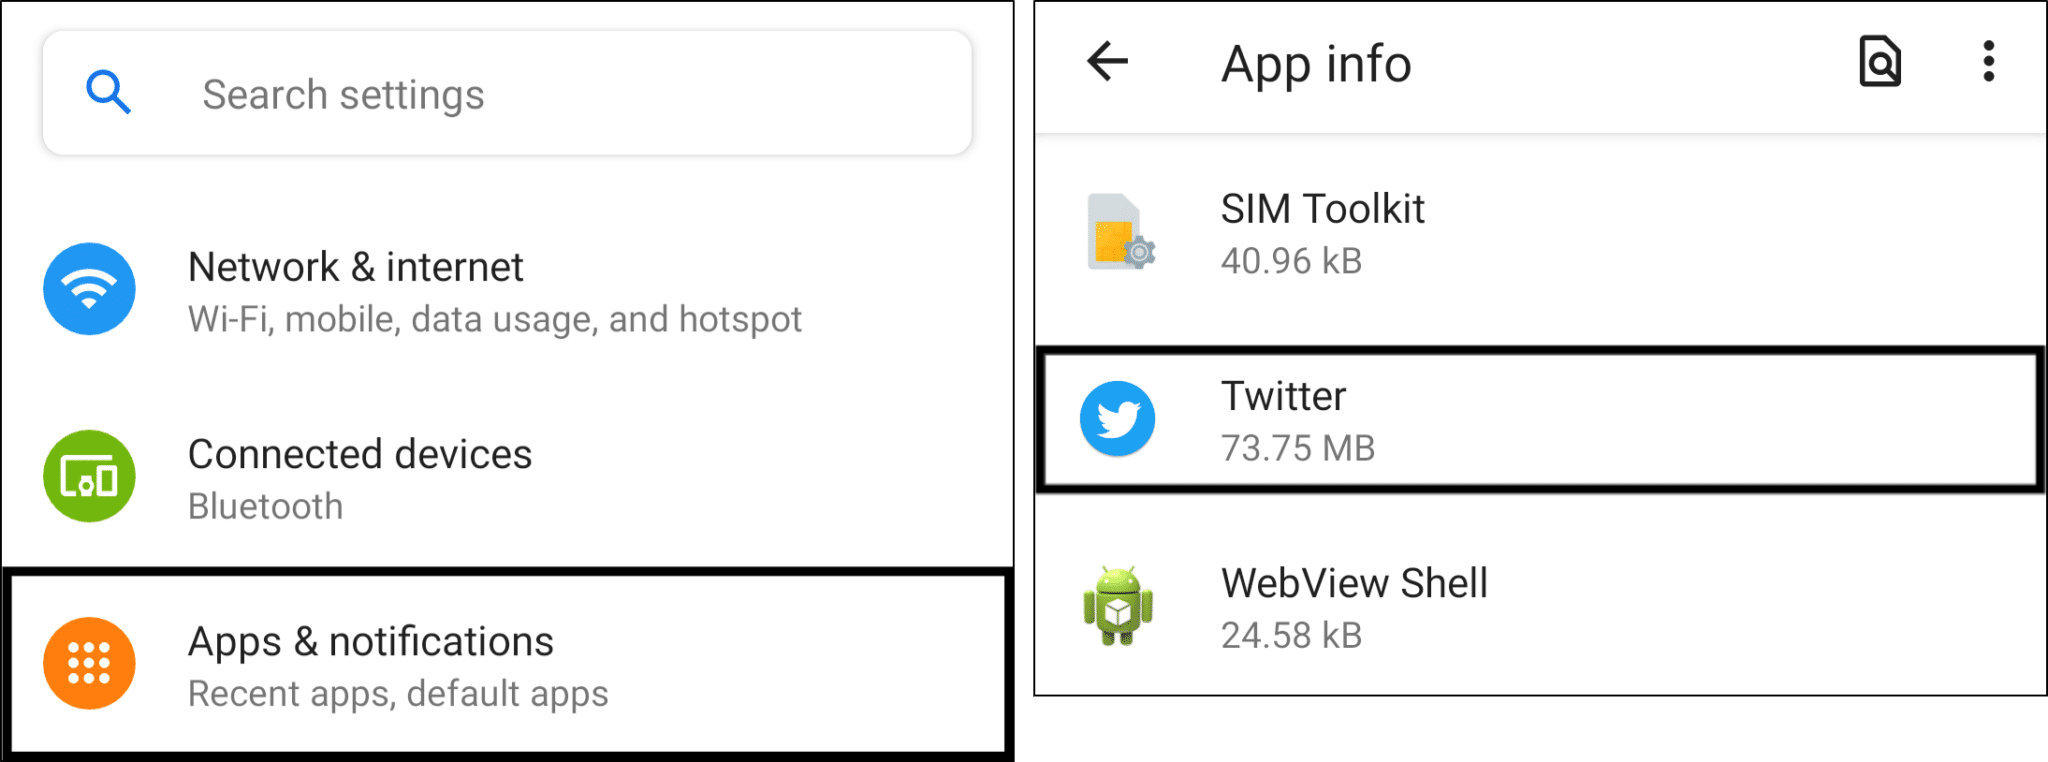 access twitter settings in system settings on Android to clear cache and data and fix Twitter Something Went Wrong error